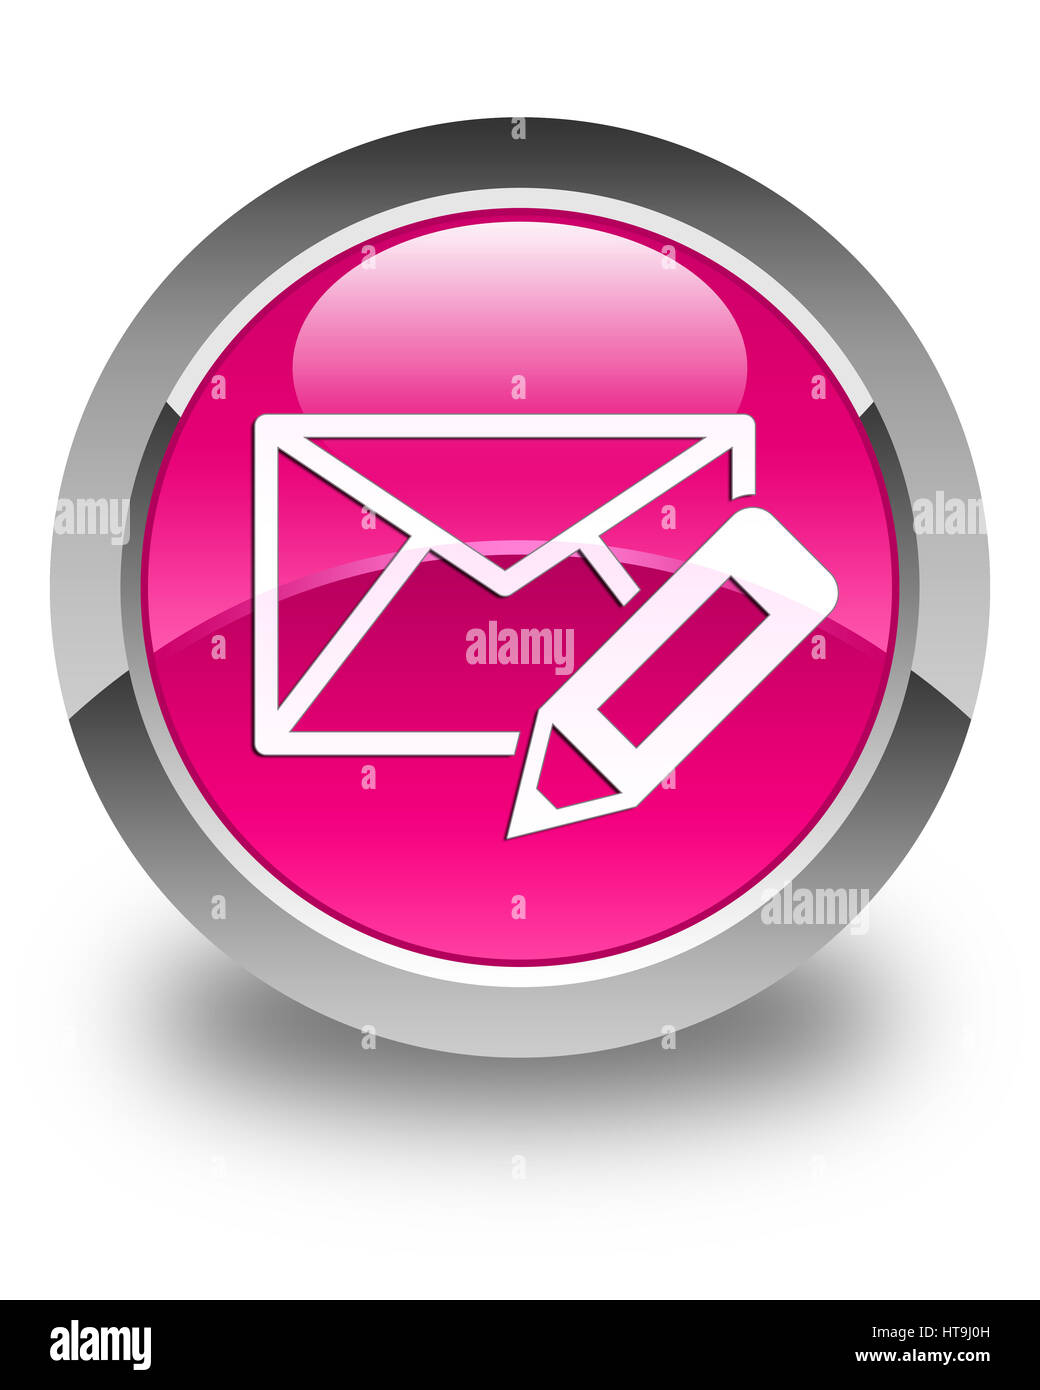 Edit email icon isolated on glossy pink round button abstract illustration Stock Photo